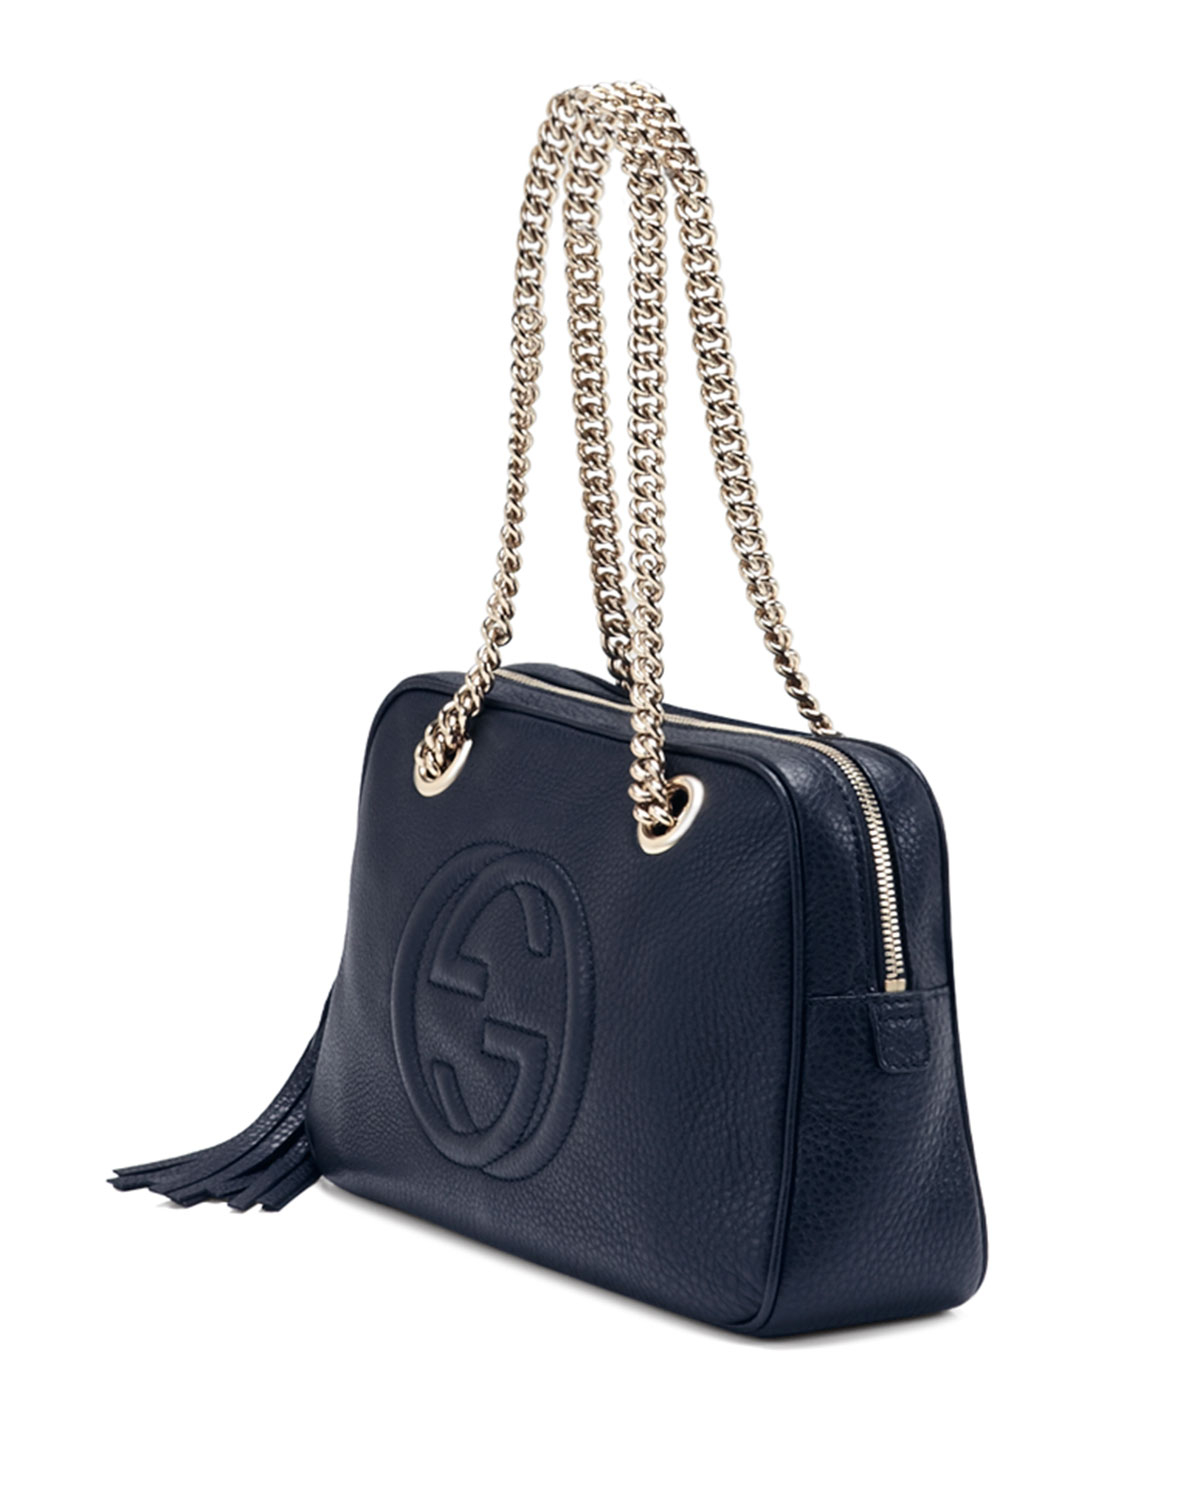 Gucci Soho Patent Leather Chain Shoulder Bag in Black - Lyst